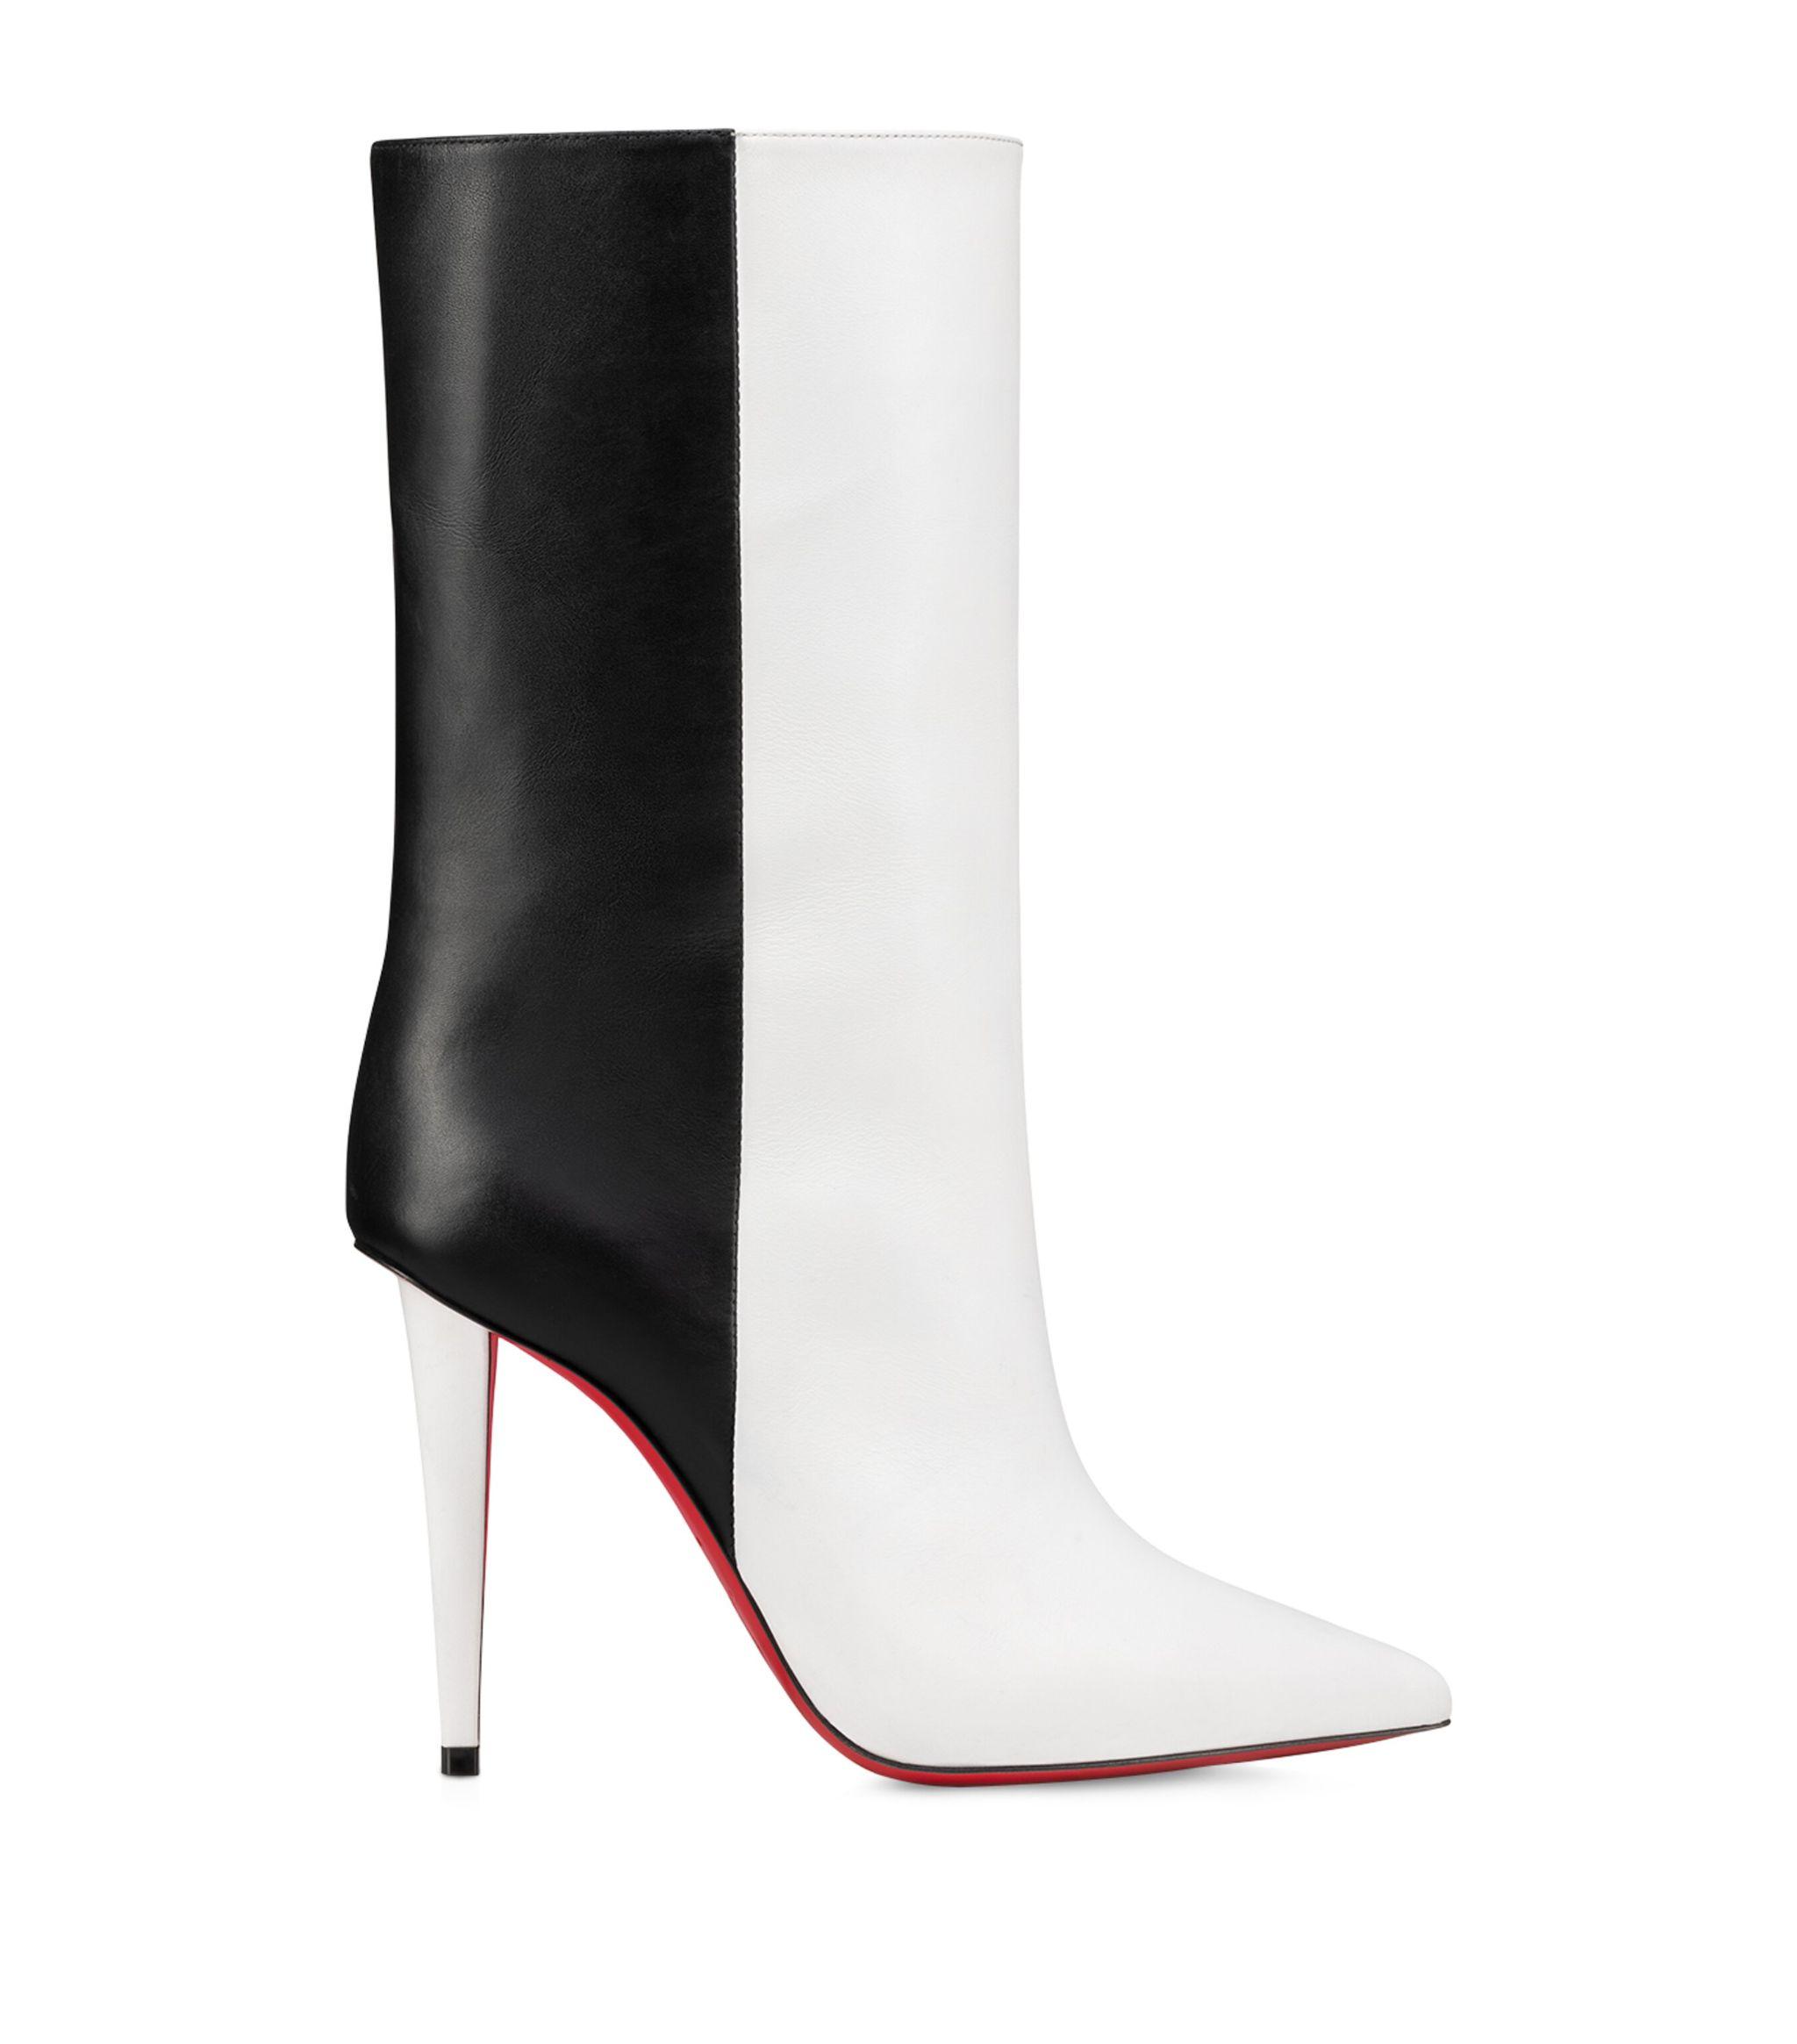 Christian Louboutin Black Leather Heeled Ankle Boots Booties 37